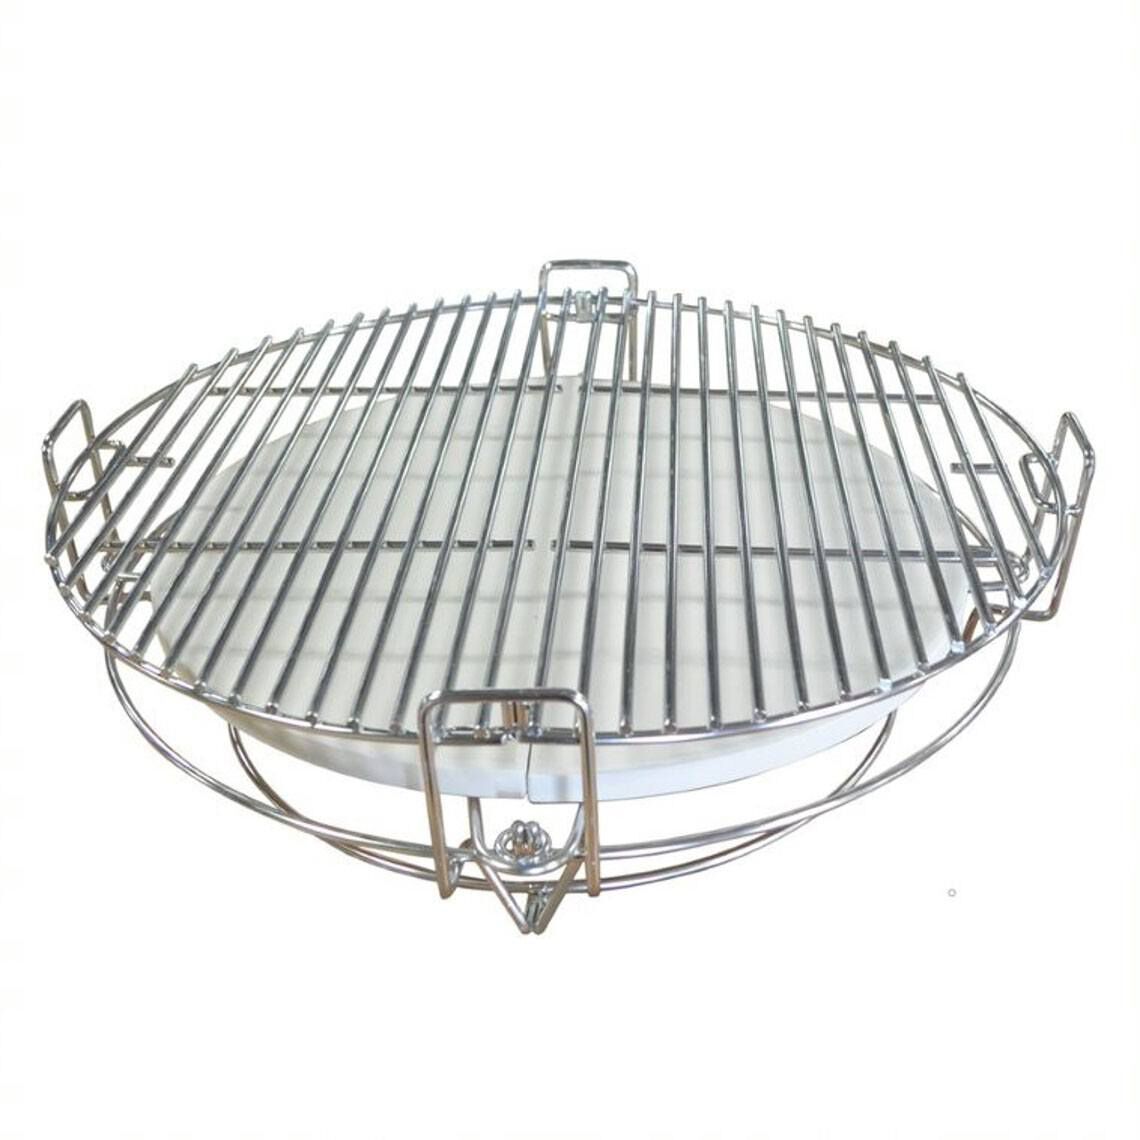 Multi-Level Cooking System Fits 15" Grill - Fits Grill Size: 15" | 15"